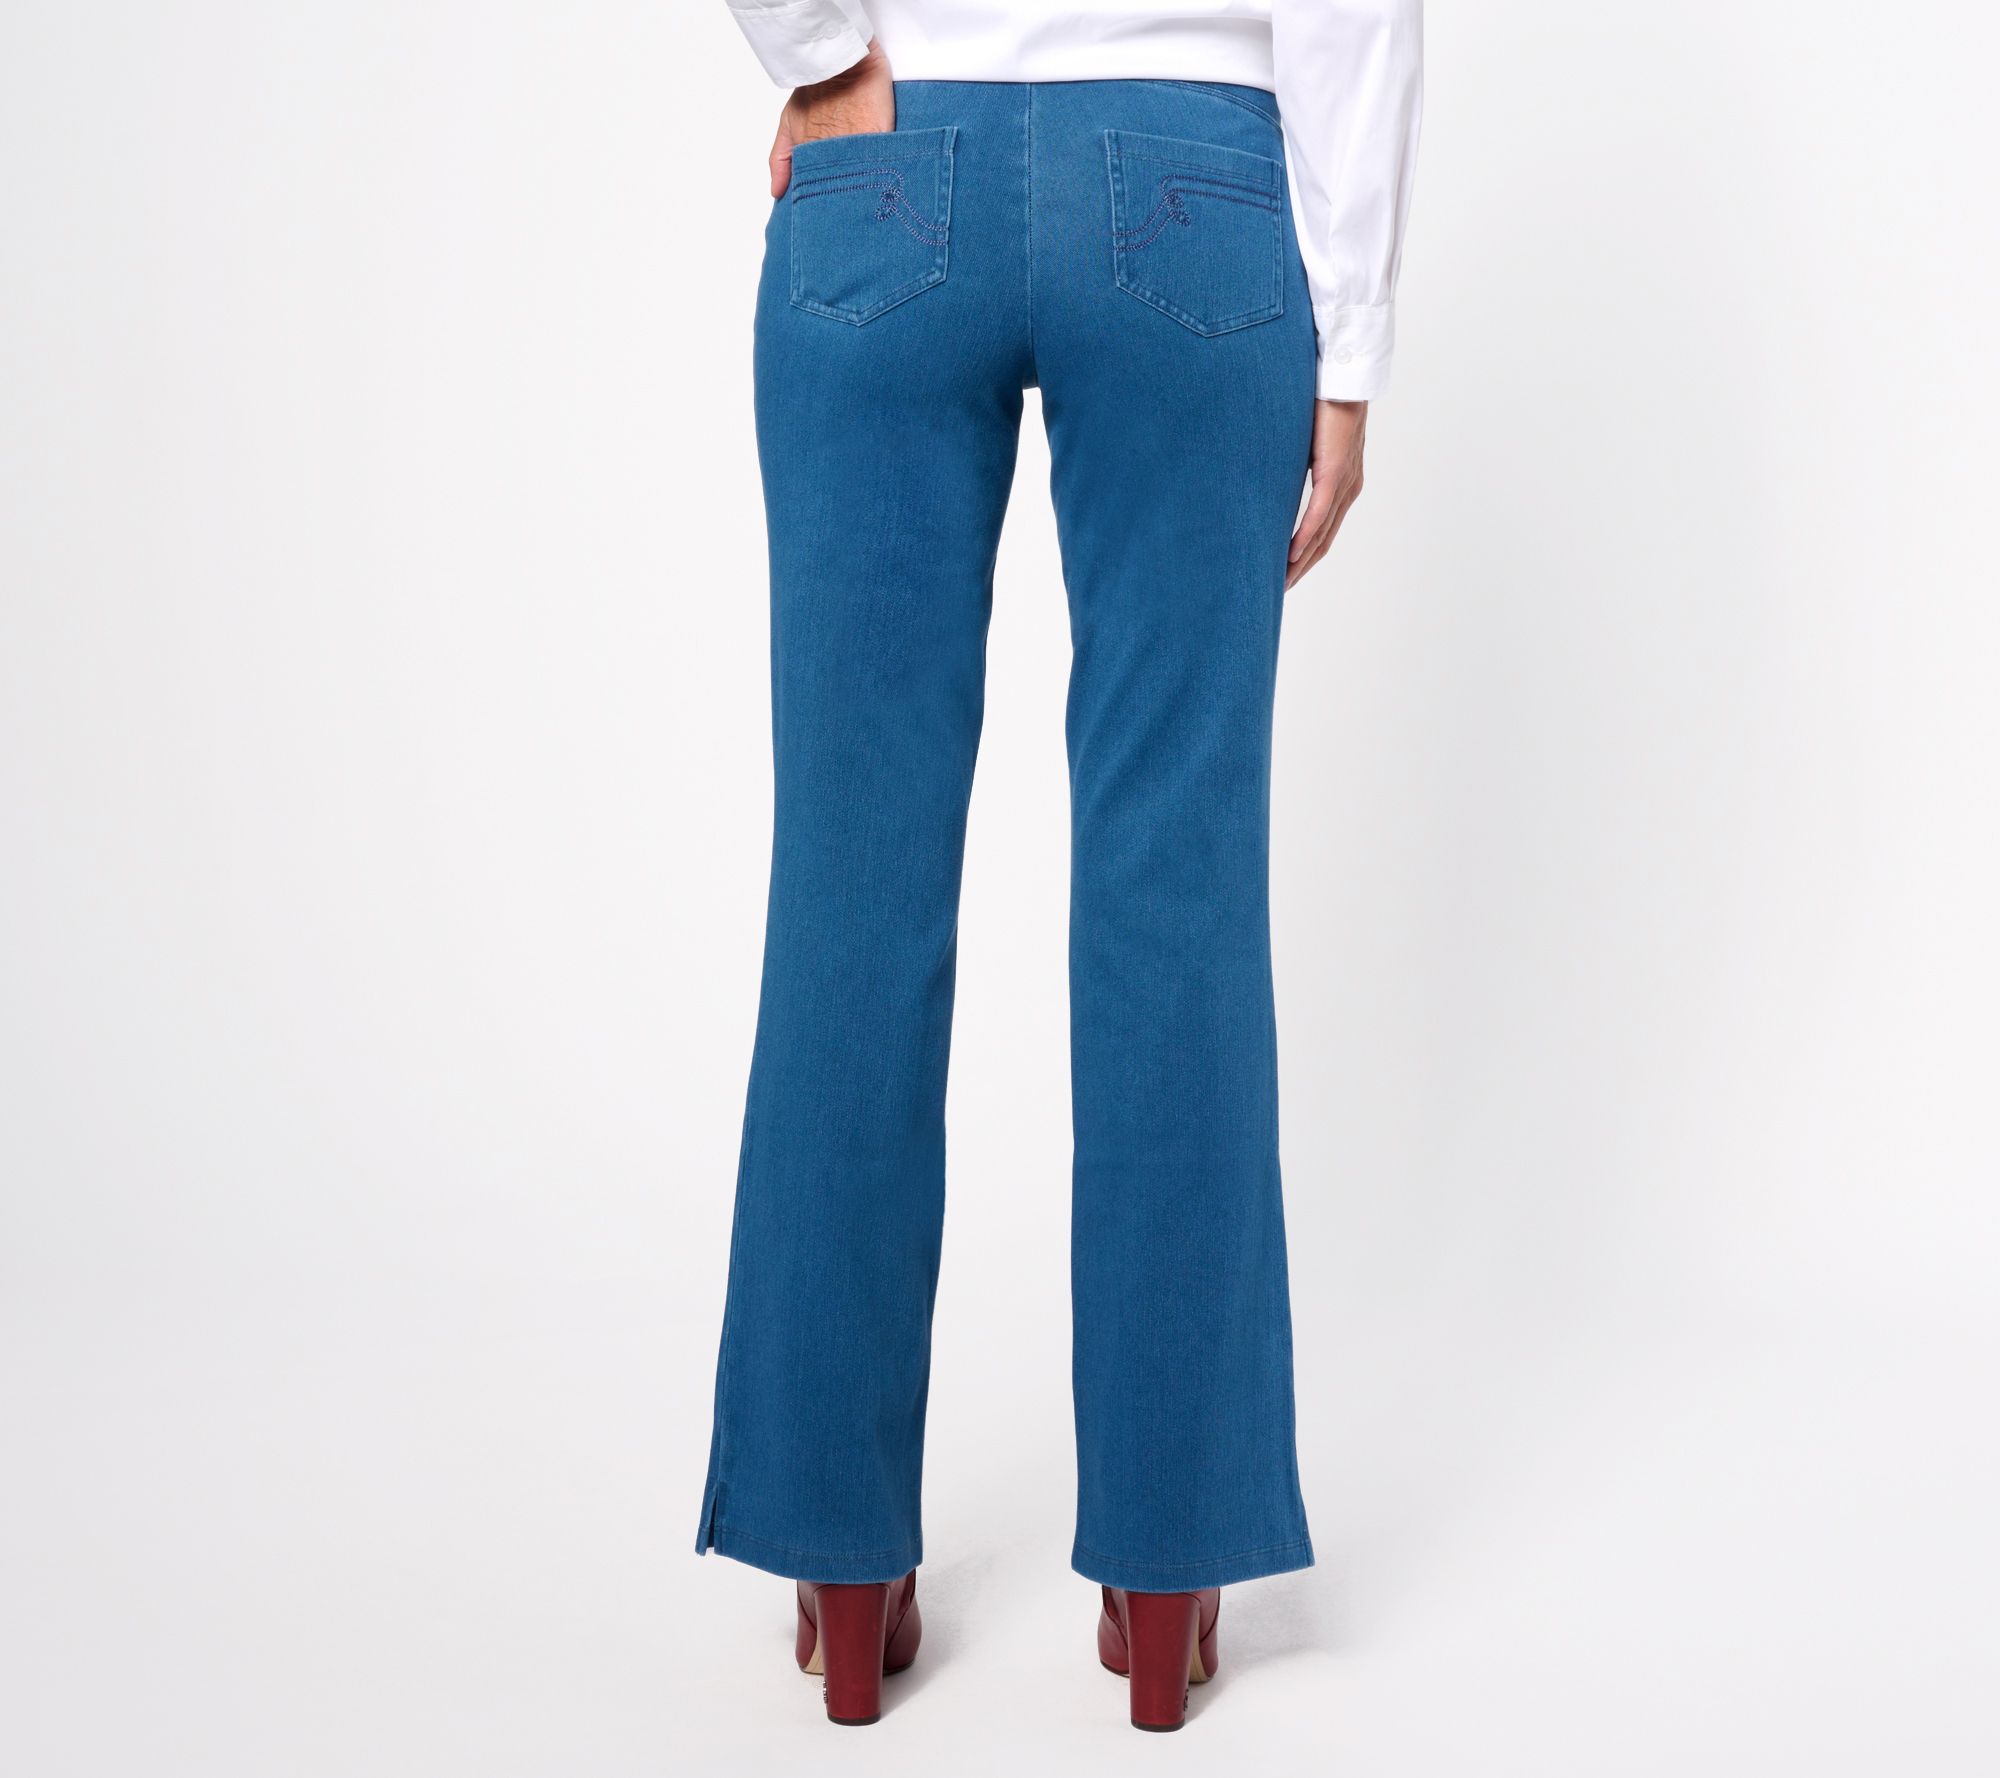 Women with Control Tall Elite Prime Stretch Denim Flare Pants